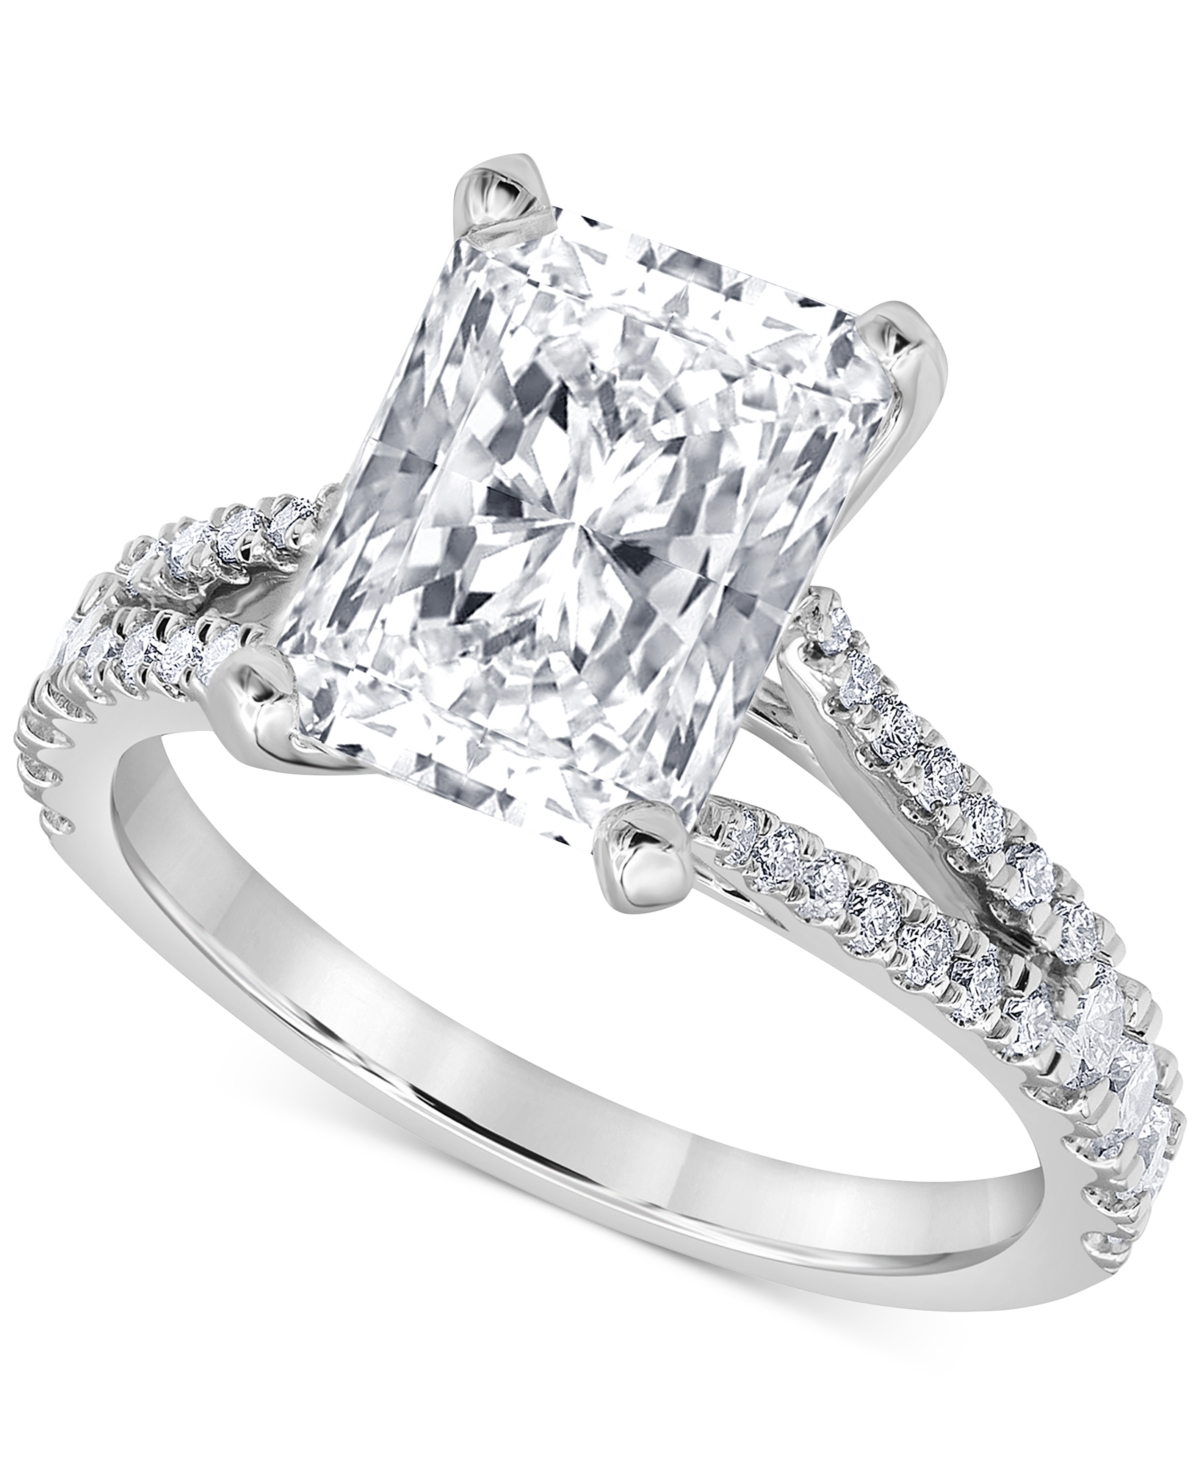 Certified Lab Grown Diamond Radiant Cut Engagement Ring (4-1/2 ct. t.w.) in 14k White Gold - White Gold